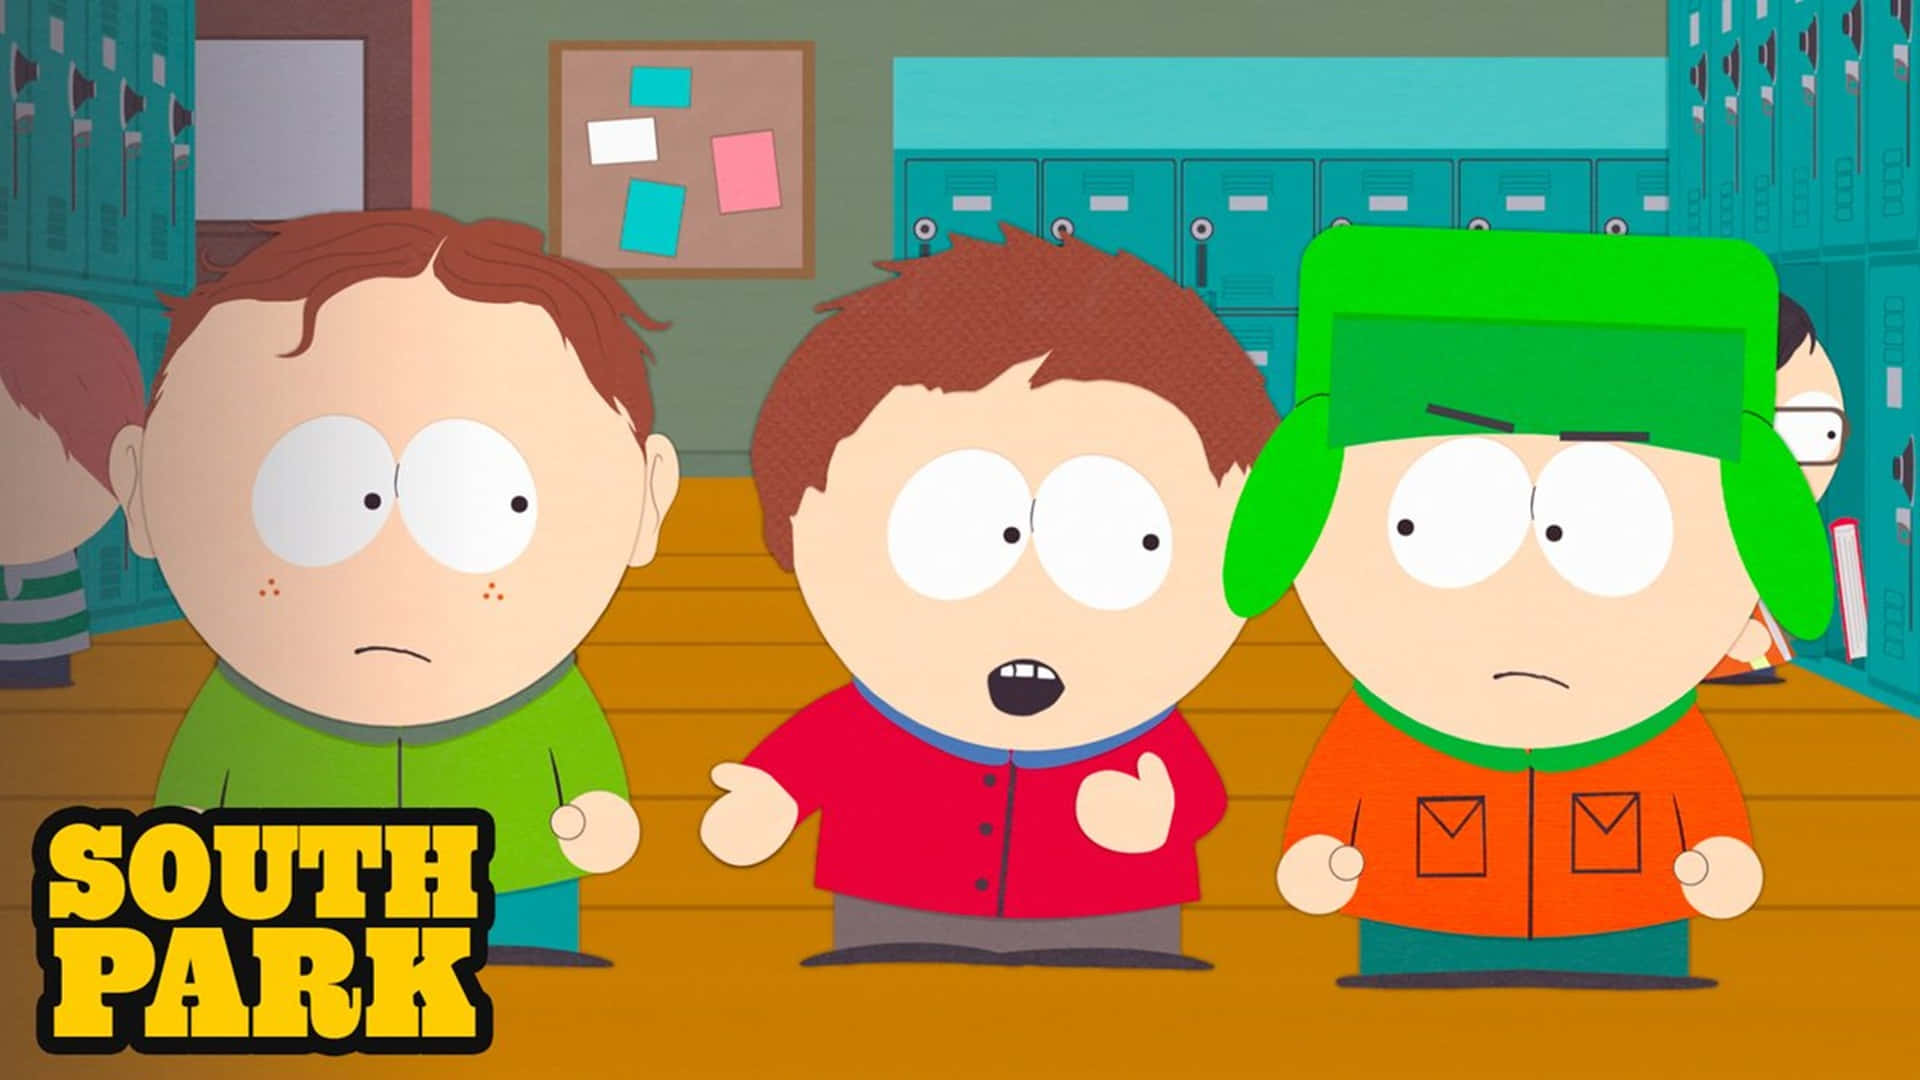 Imágenesde South Park.